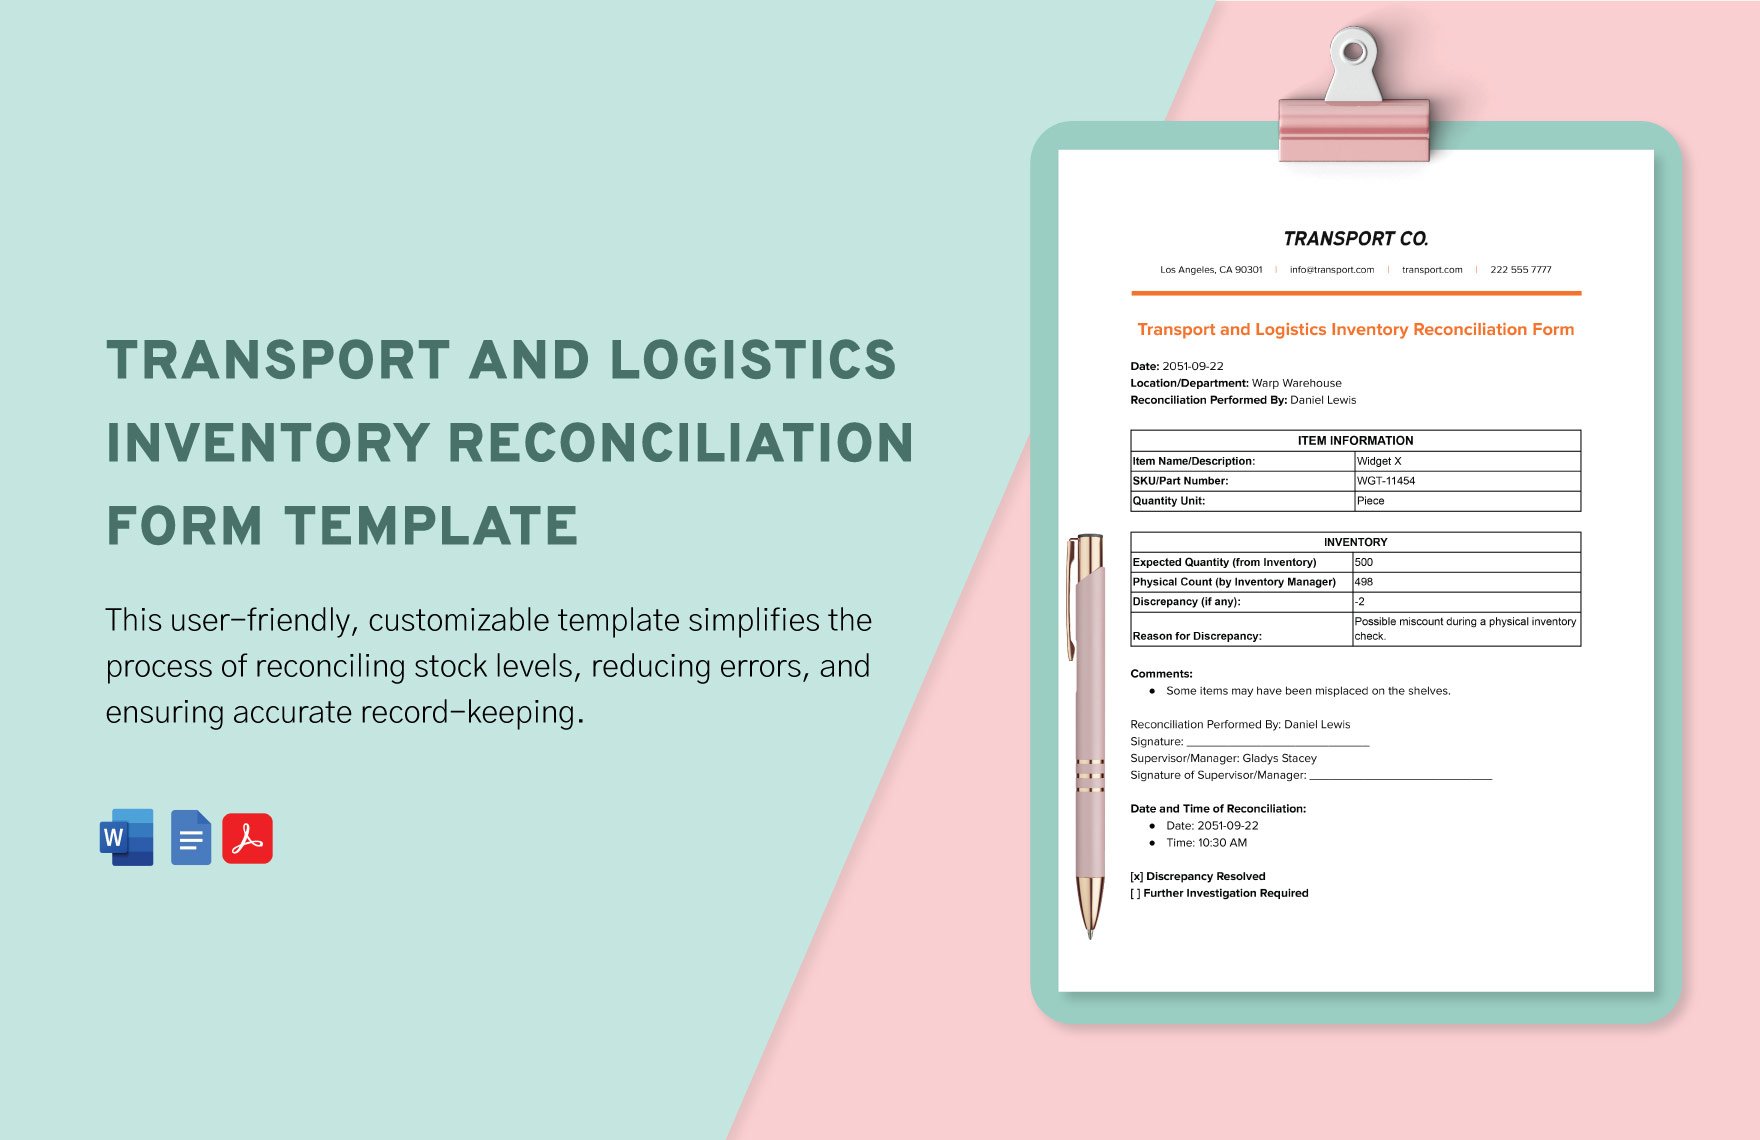 Transport and Logistics Inventory Reconciliation Form Template in Word, Google Docs, PDF